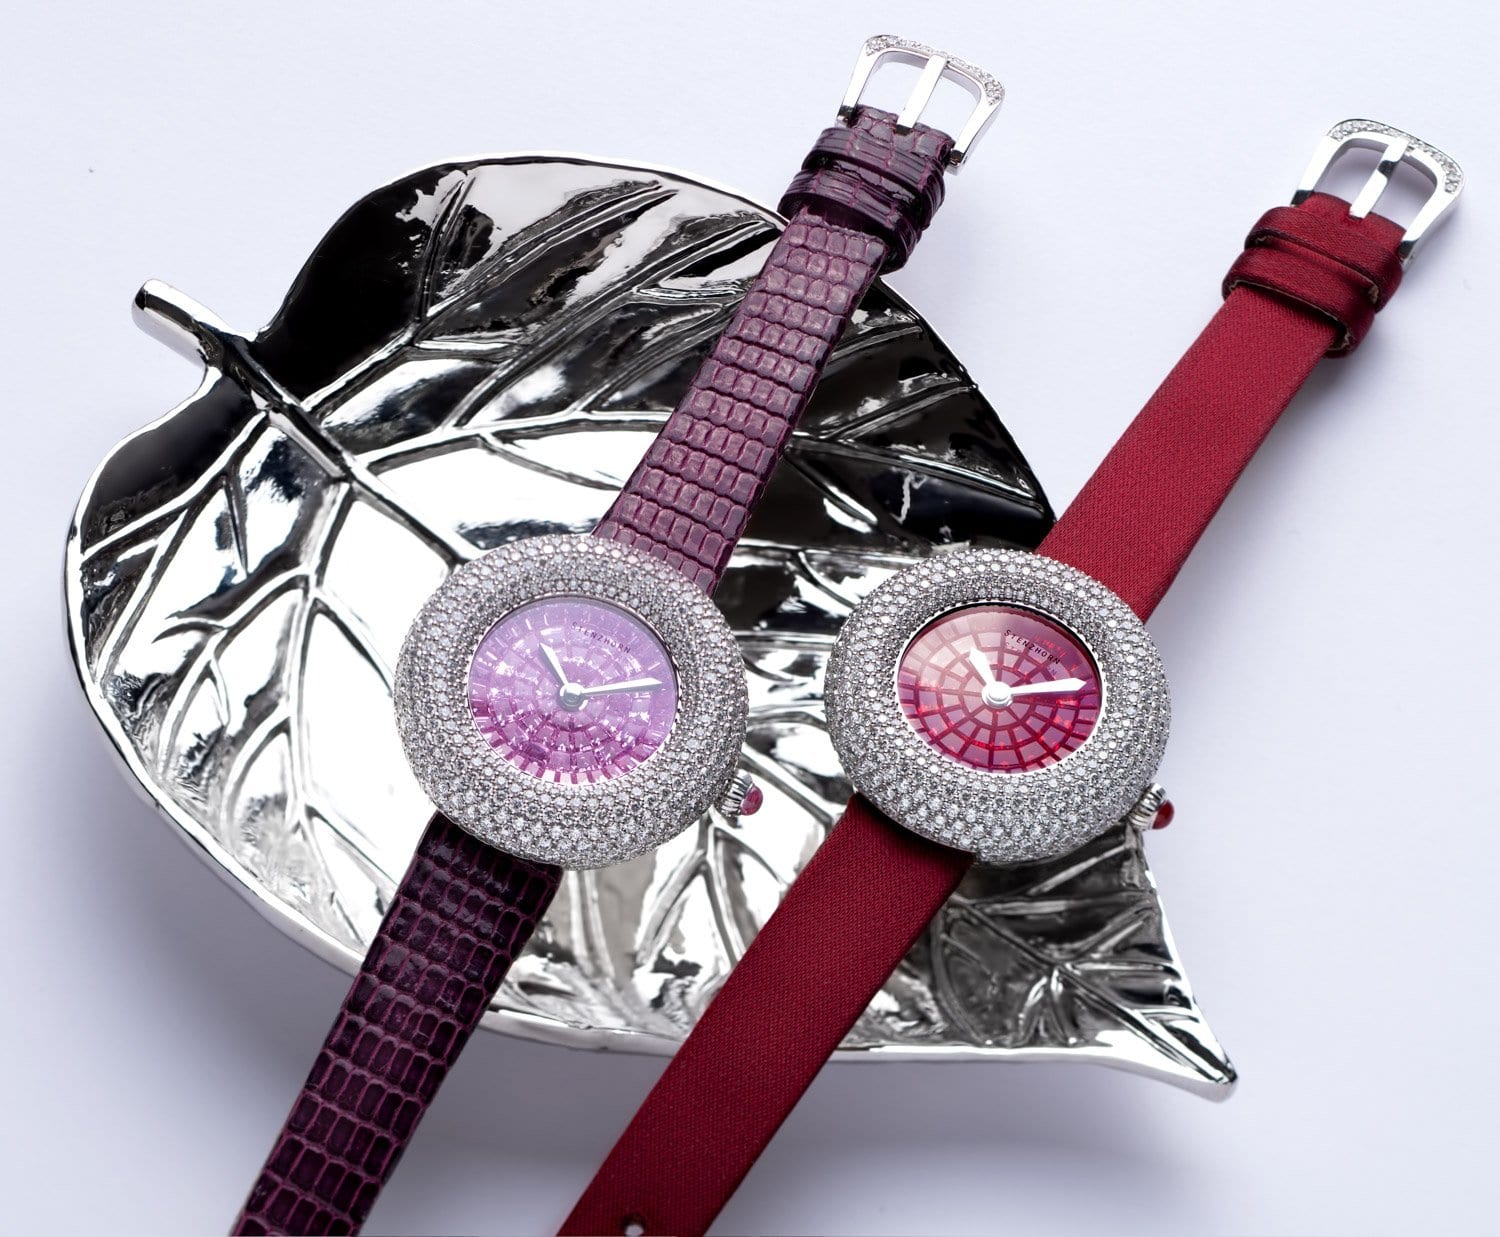 MOSAIC Watch, Ruby Fever